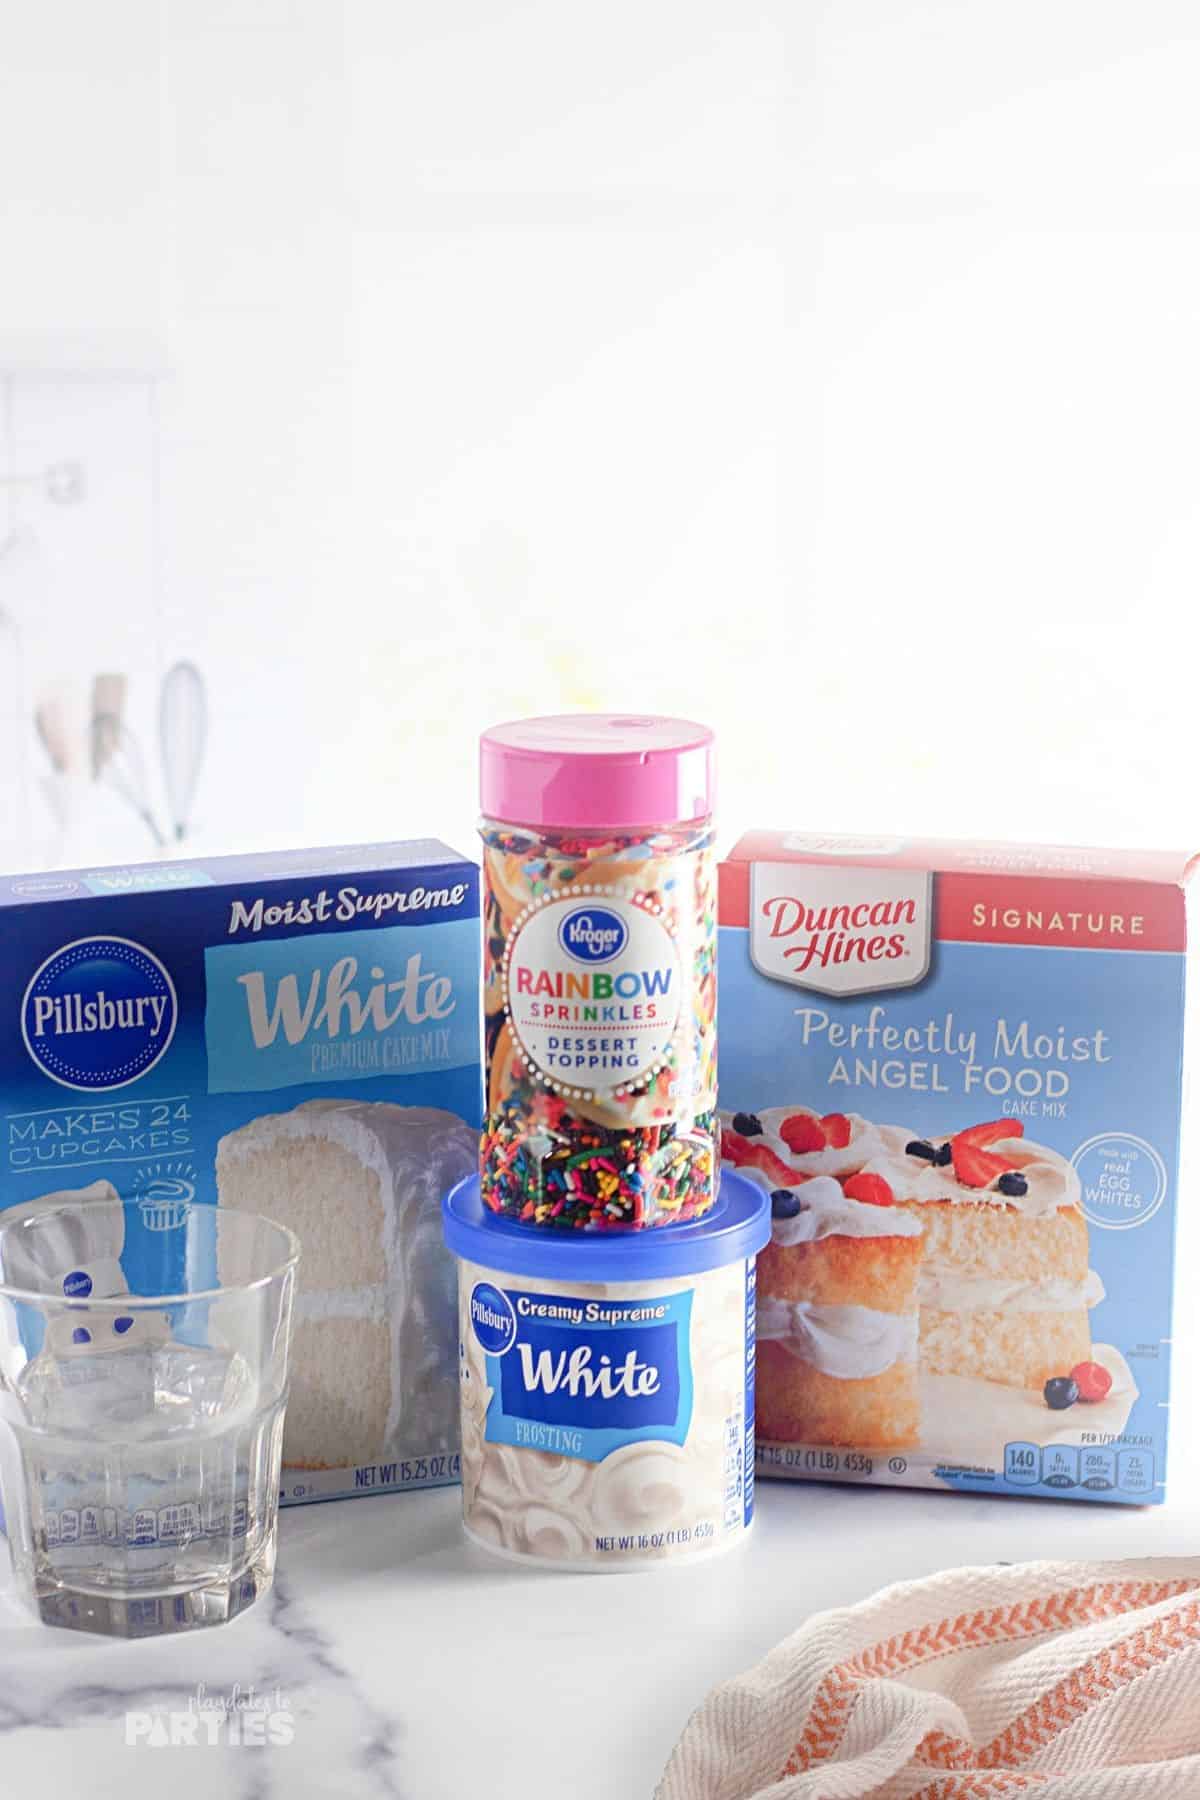 Ingredients include two box cake mixes, sprinkles, water, and frosting.